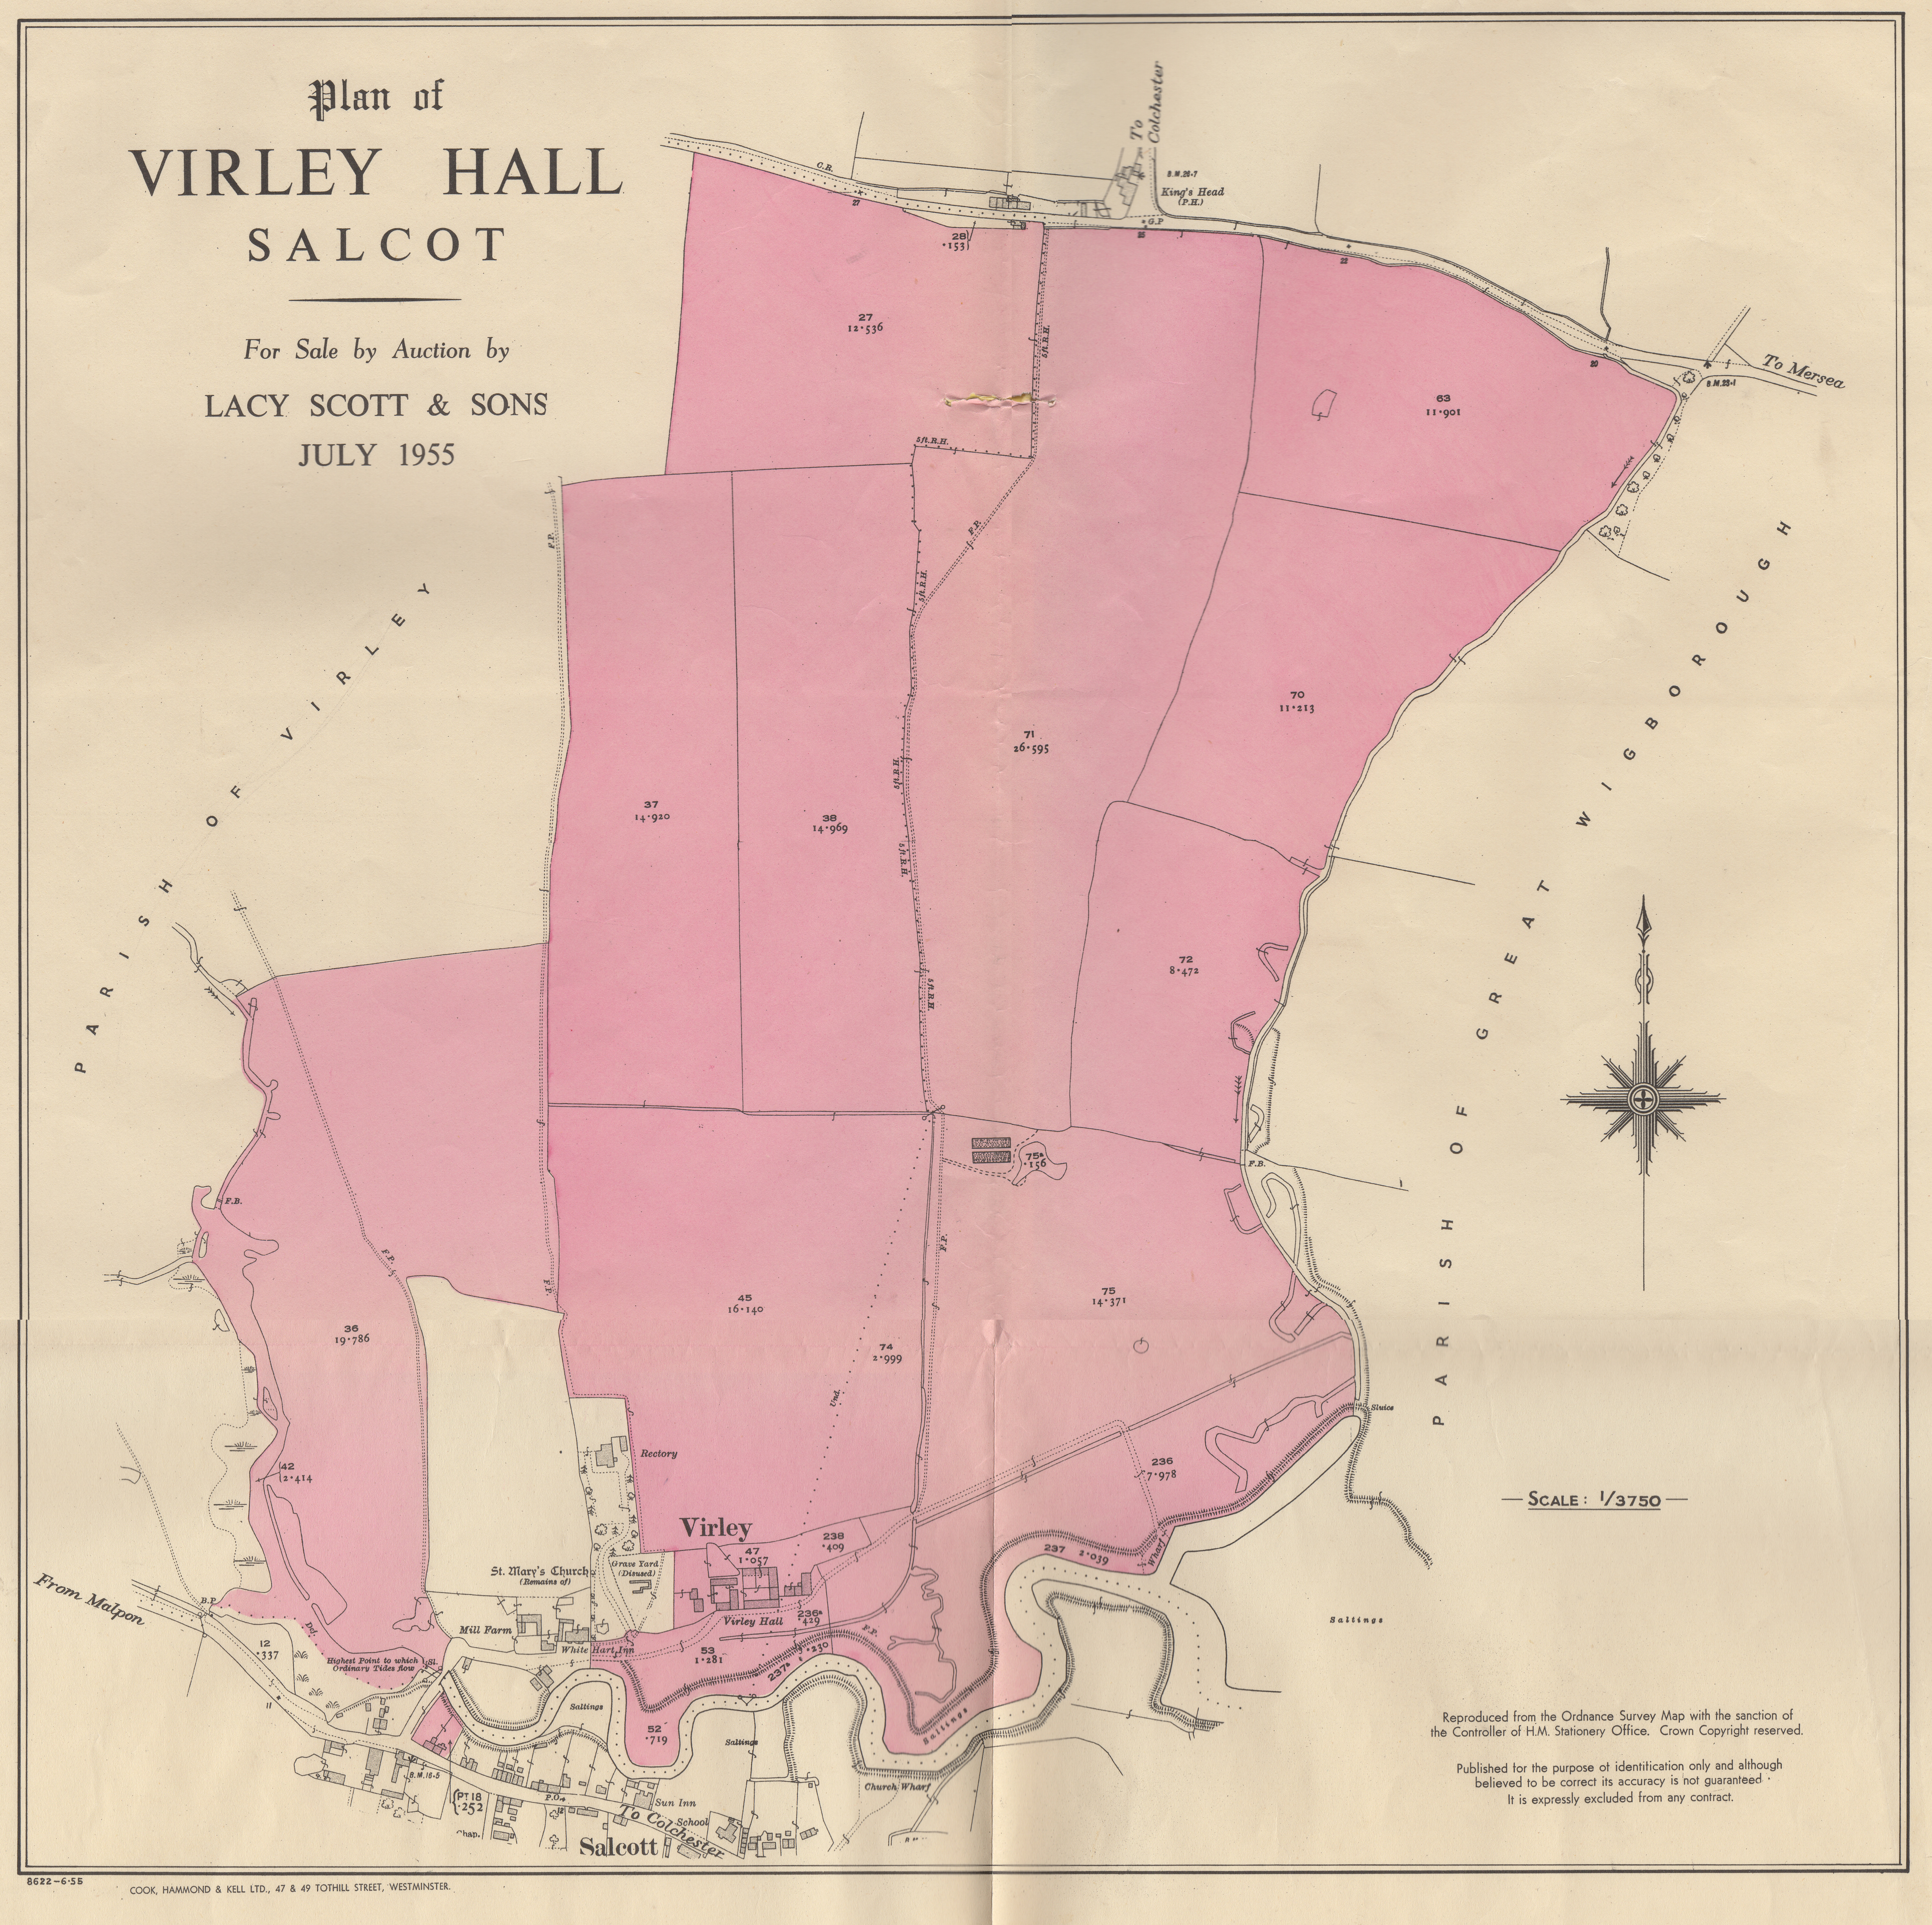  Virley Hall Farm Sale, Salcot, Essex.

Plan of Virley Hall, for sale by Auction by Lacy, Scott & Sons.

Based on Ordnance Survey - includes part of village of Salcott. 
Cat1 Places-->Salcott & Virley Cat2 Maps and Charts